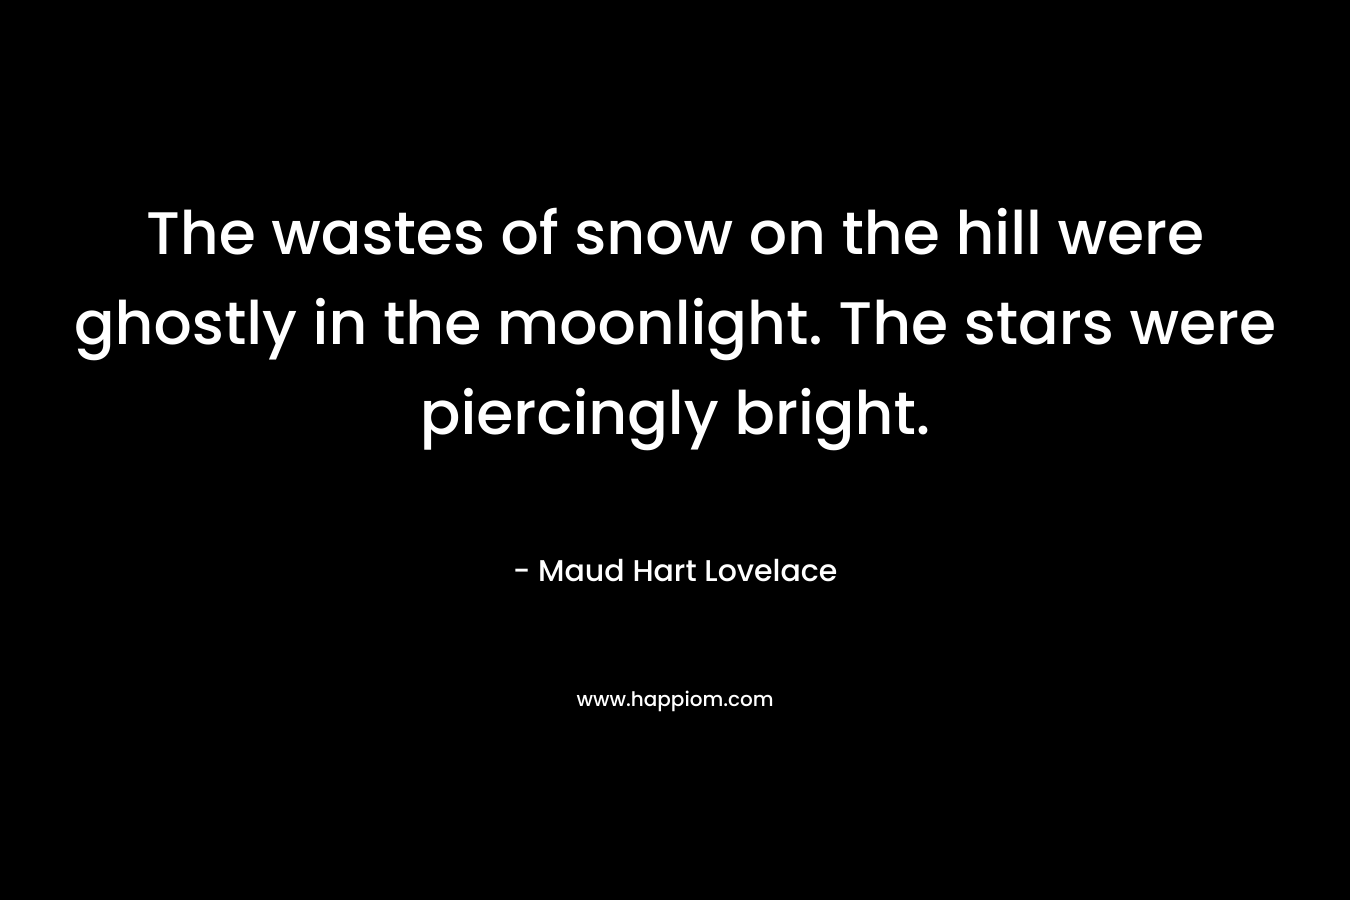 The wastes of snow on the hill were ghostly in the moonlight. The stars were piercingly bright.